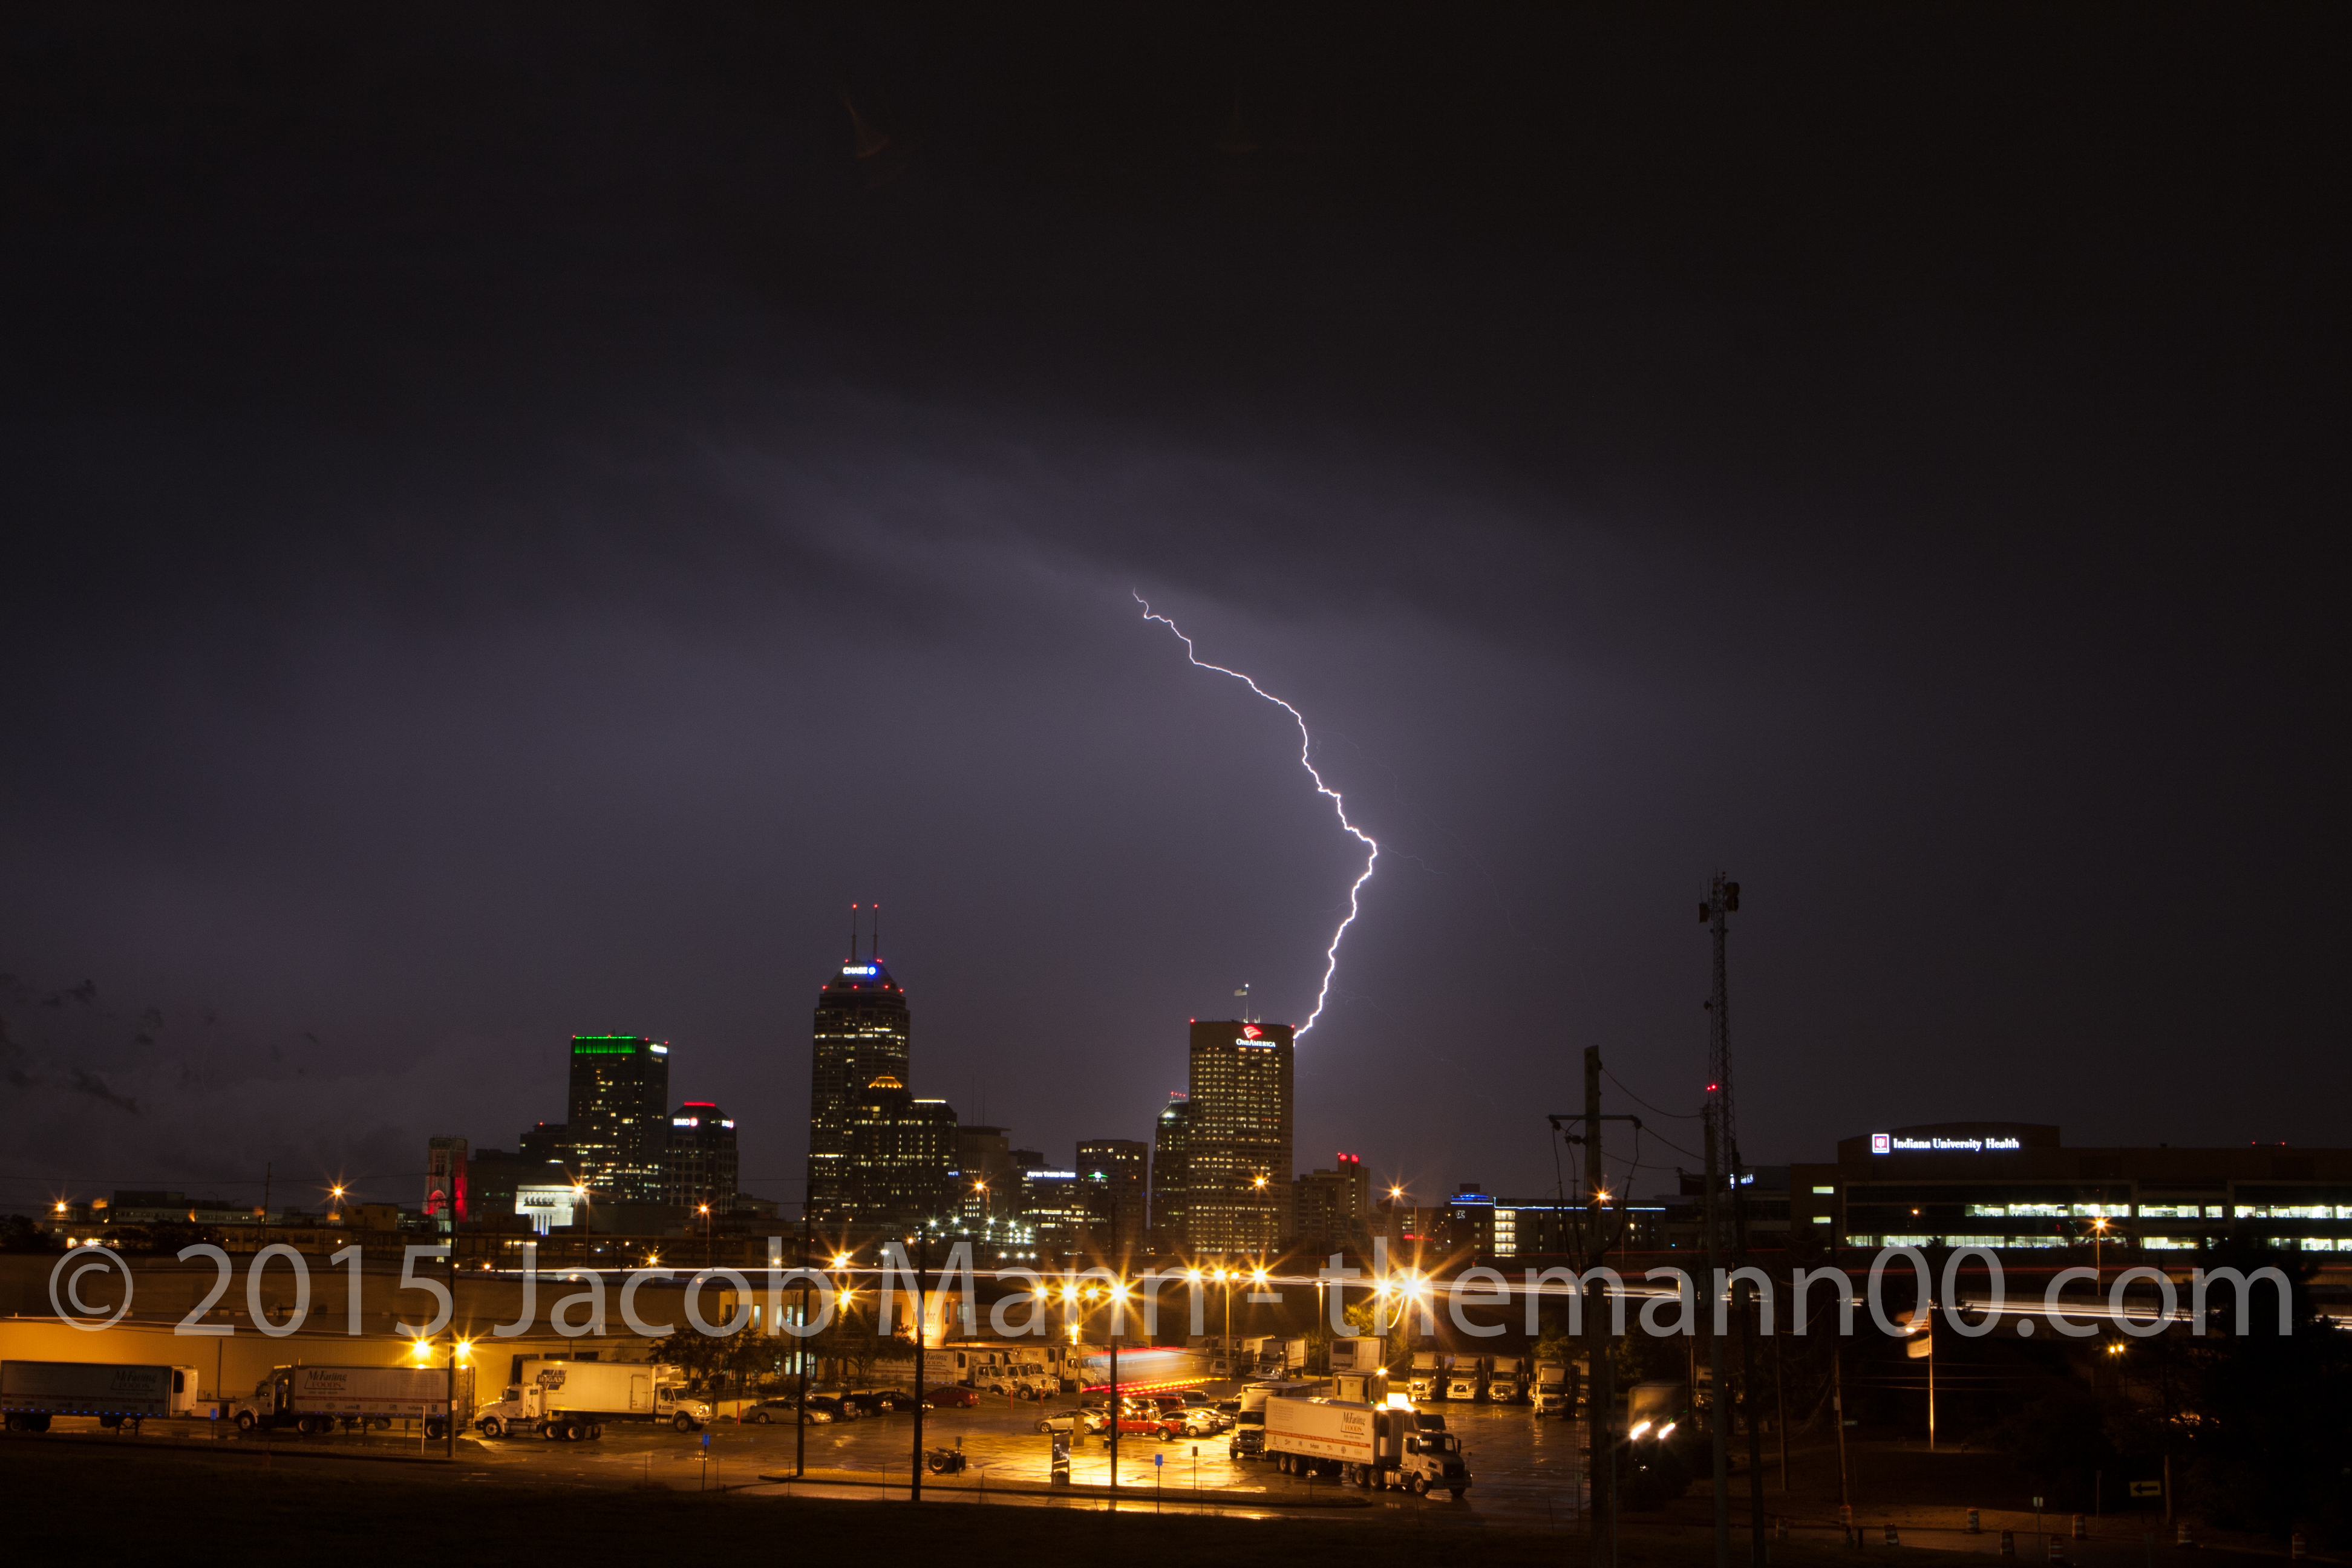 Indy downtown lightning – July 13th, 2015